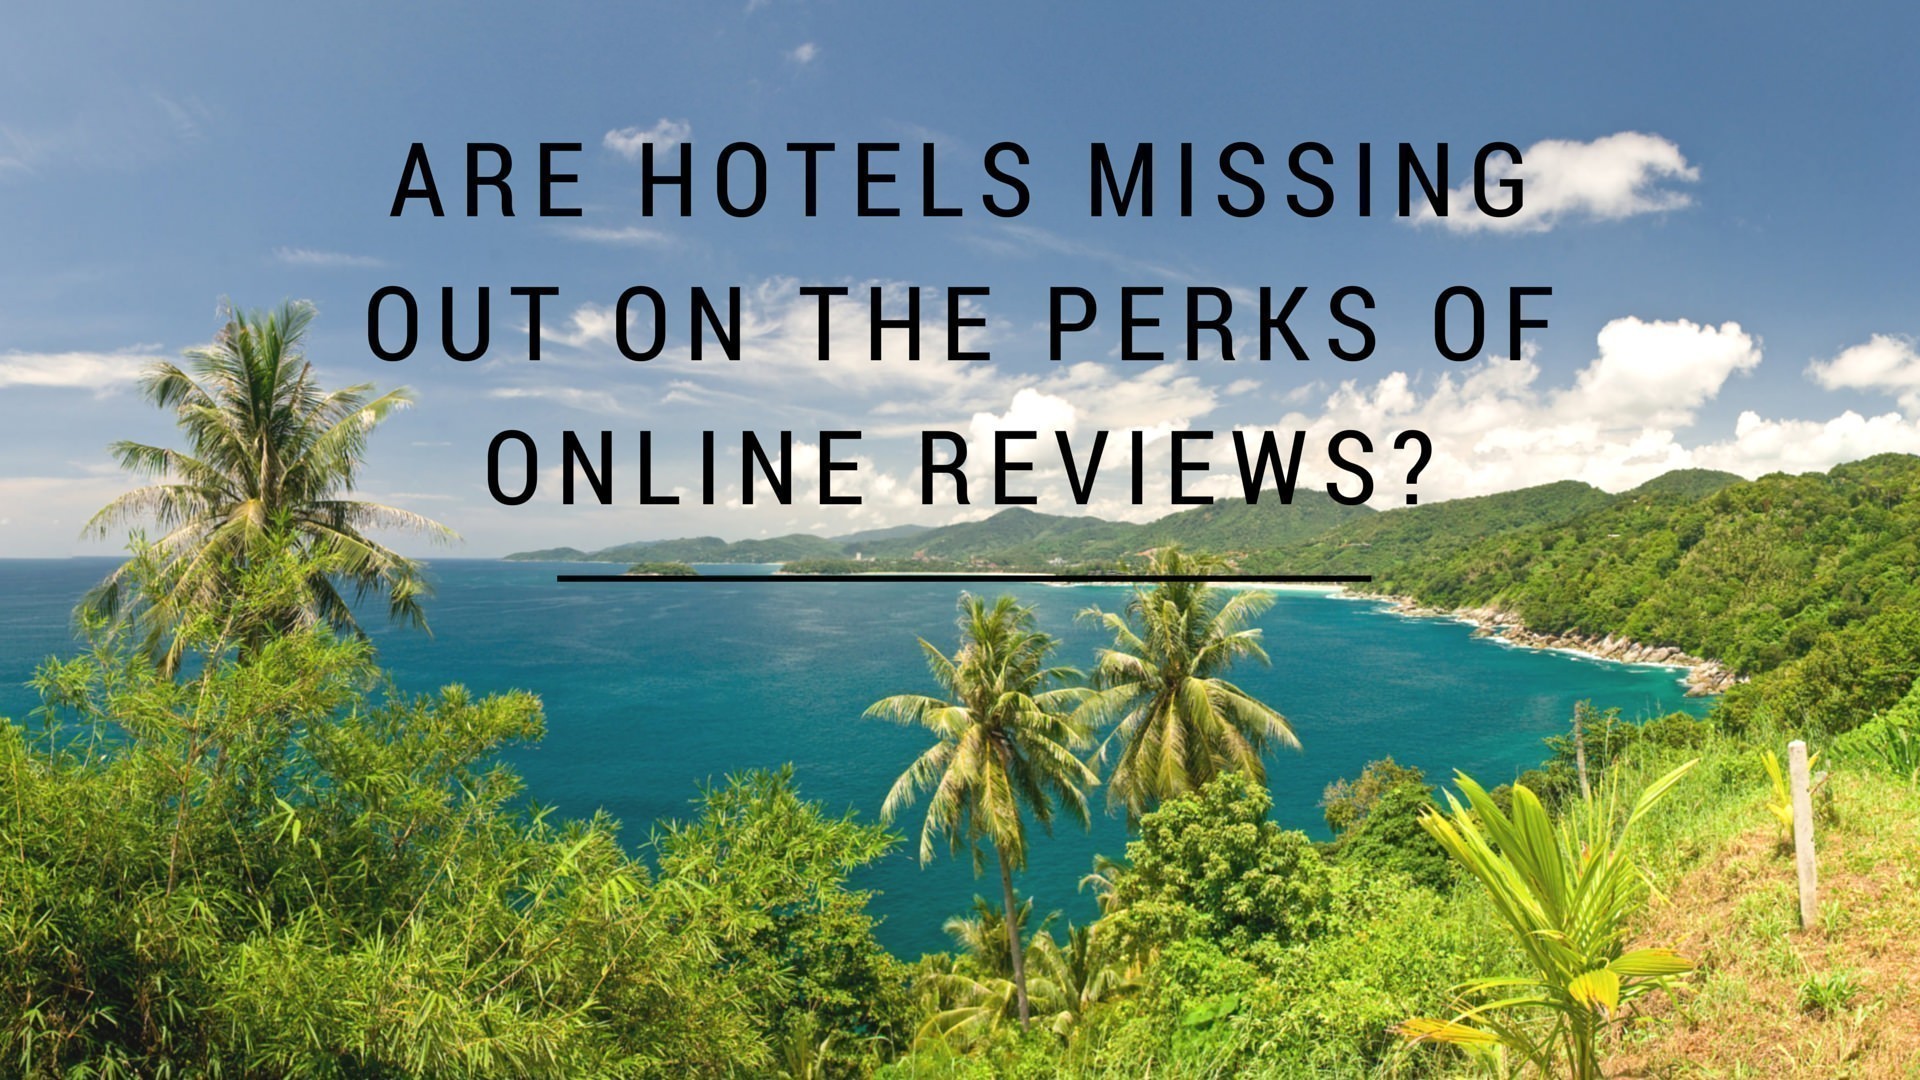 Are Hotels Missing Out on the Perks of Online Reviews?